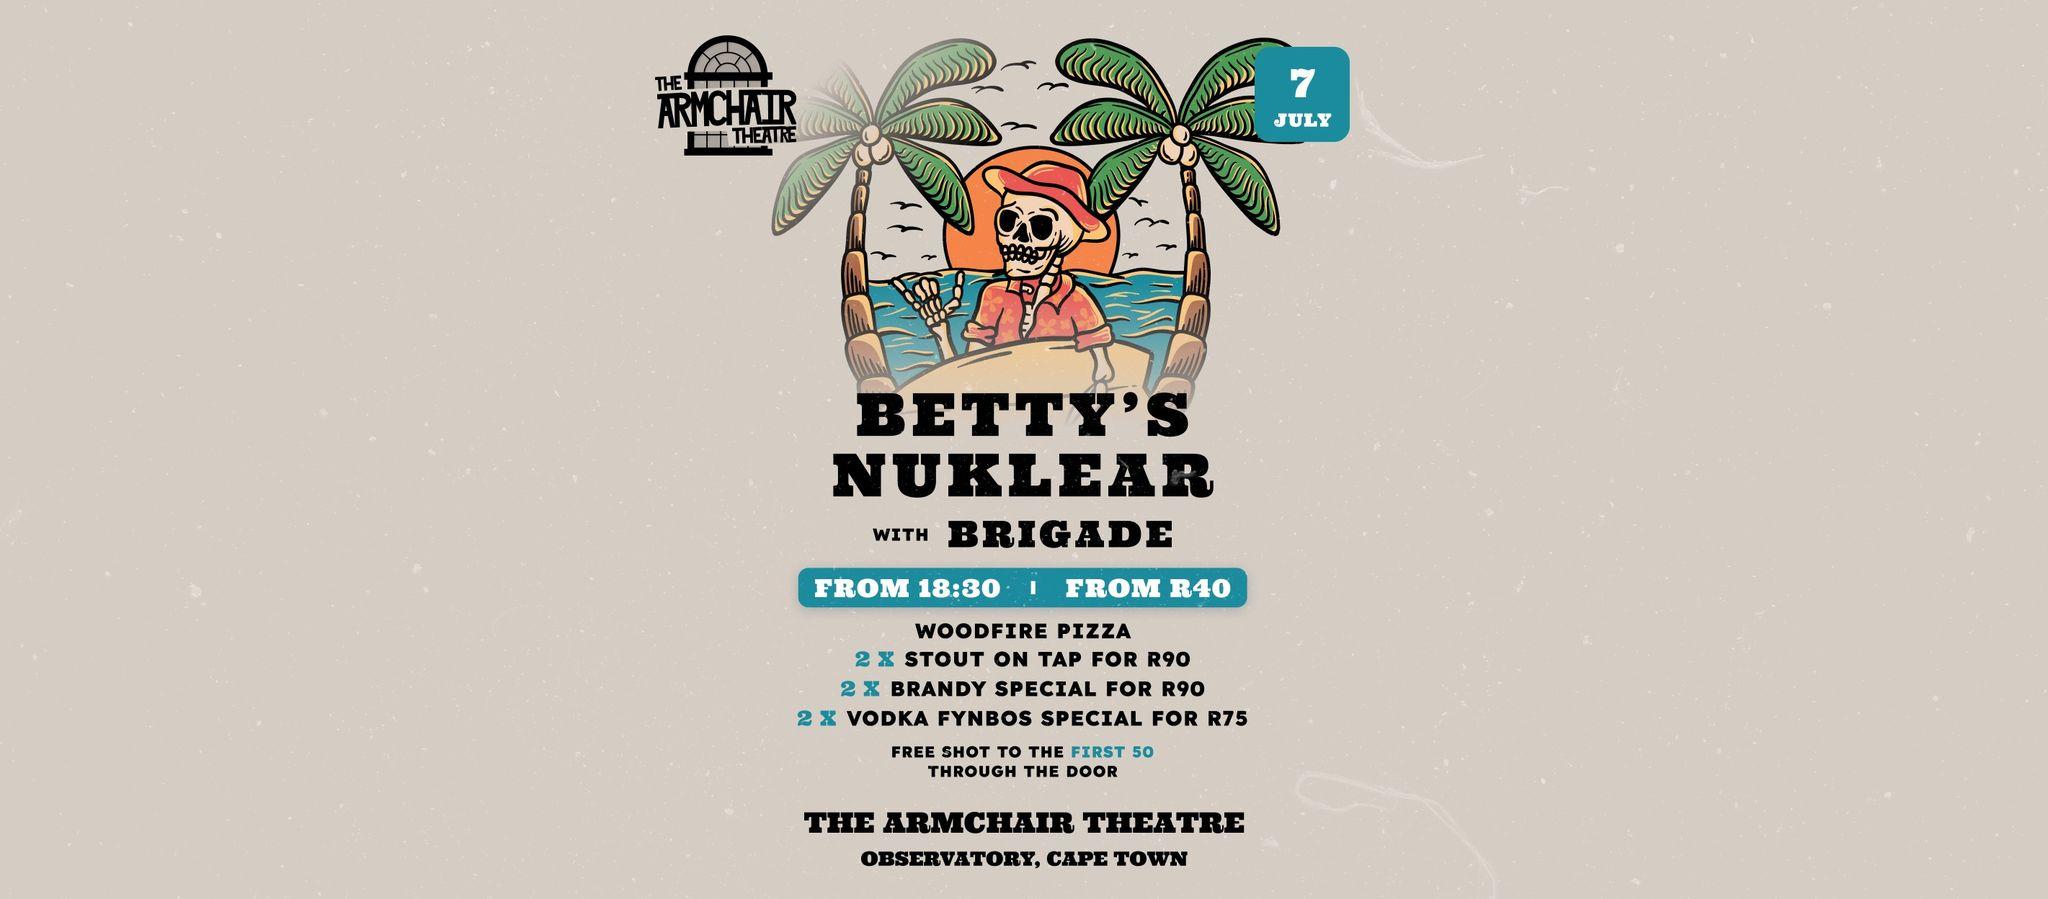 Experience the Electrifying Performance of Betty's Nuklear & Brigade at The Armchair Theatre

Prepare for an unforgettable night as Betty's Nuklear & Brigade takes the stage at The Armchair Theatre. Get ready to be blown away by their energetic and captivating live performance.

Event Details:
Date: Friday, July 7
Time: 20:00 - 23:00
Venue: The Armchair Theatre, 135 Lower Main Rd, Observatory, Cape Town, 7925

Ticket Information:
Secure your spot for this electrifying event. Tickets can be purchased online, ensuring a seamless and secure payment process. Don't miss the opportunity to witness this incredible performance.

Directions:
Finding your way to The Armchair Theatre is simple:
Address: 135 Lower Main Rd, Observatory, Cape Town, 7925.
Use the provided directions or your preferred navigation app to easily reach the venue and be part of this thrilling event.

Get ready for an evening of explosive music and energetic vibes as Betty's Nuklear & Brigade deliver an incredible live performance. Don't wait - secure your tickets now and be a part of this unforgettable experience.